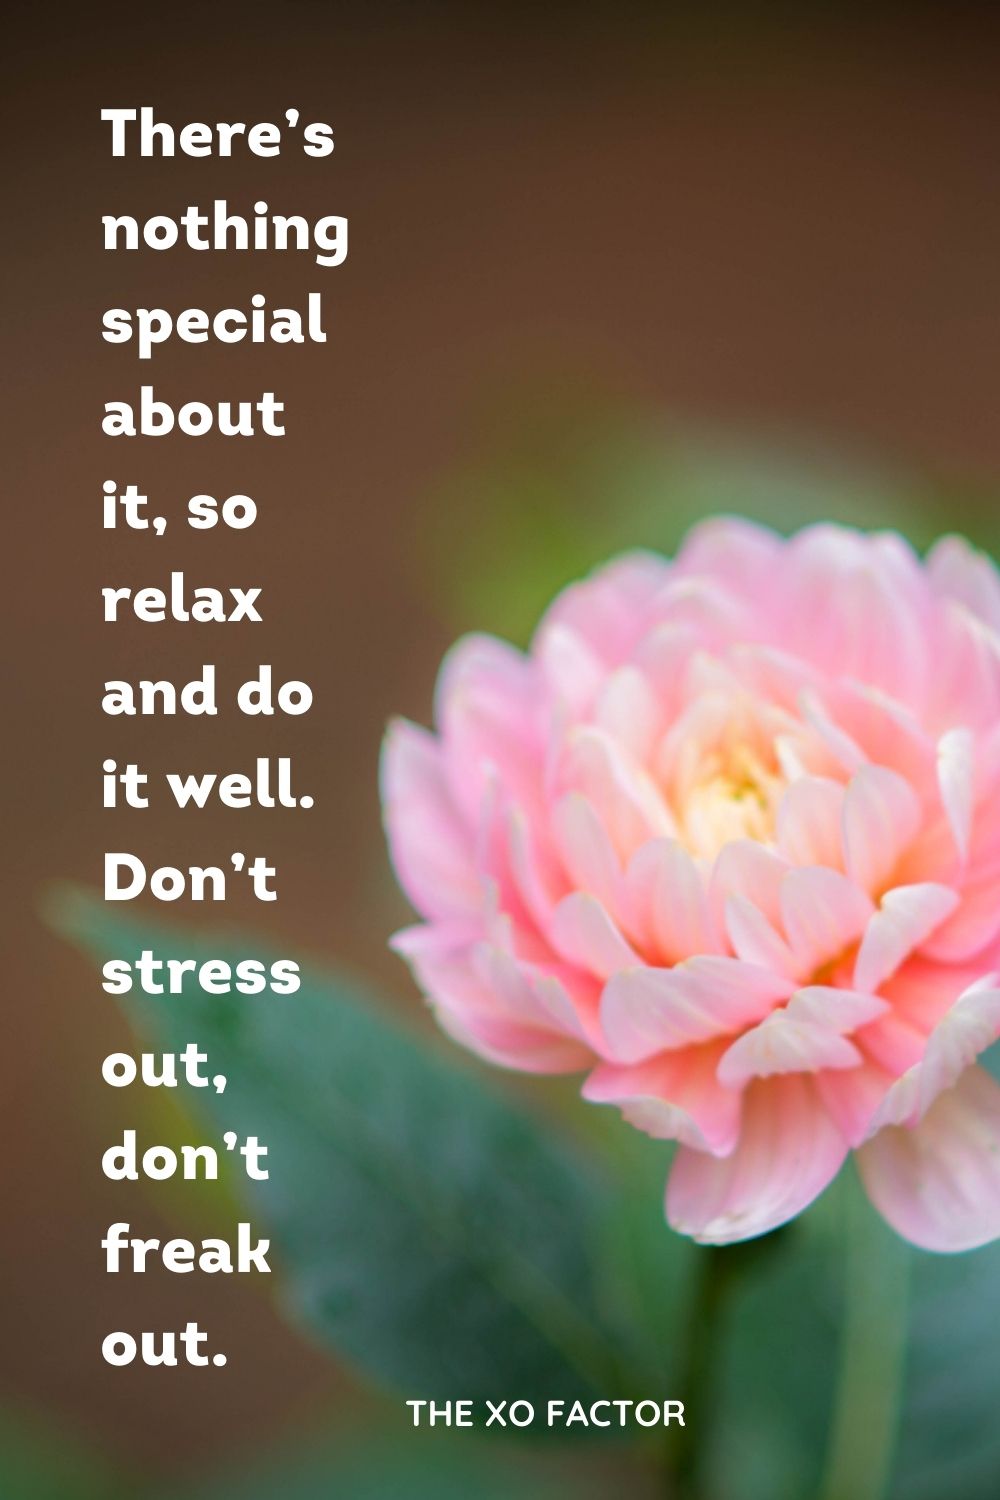 There’s nothing special about it, so relax and do it well. Don’t stress out, don’t freak out.